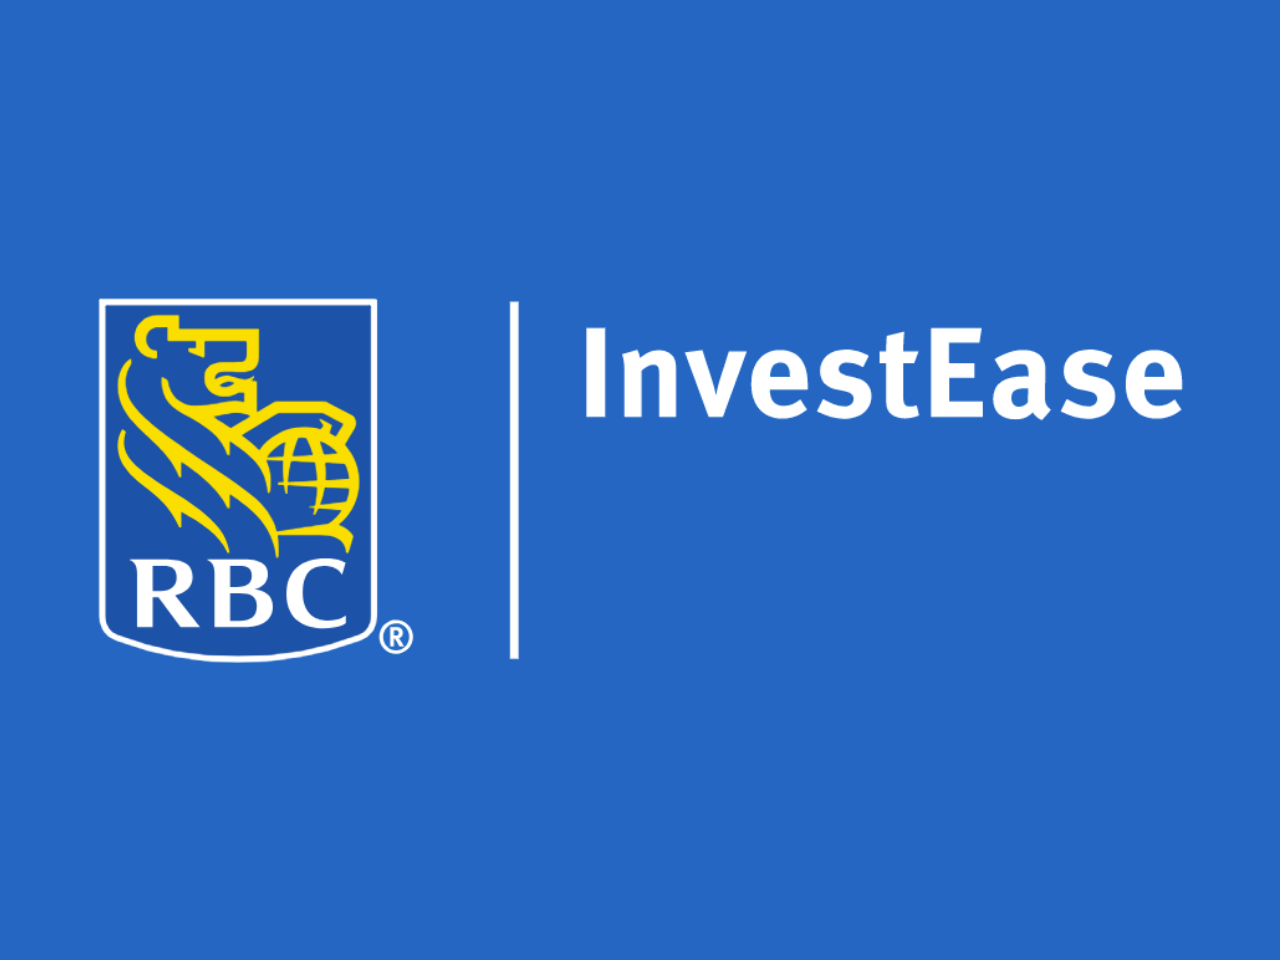 RBC InvestEase Review